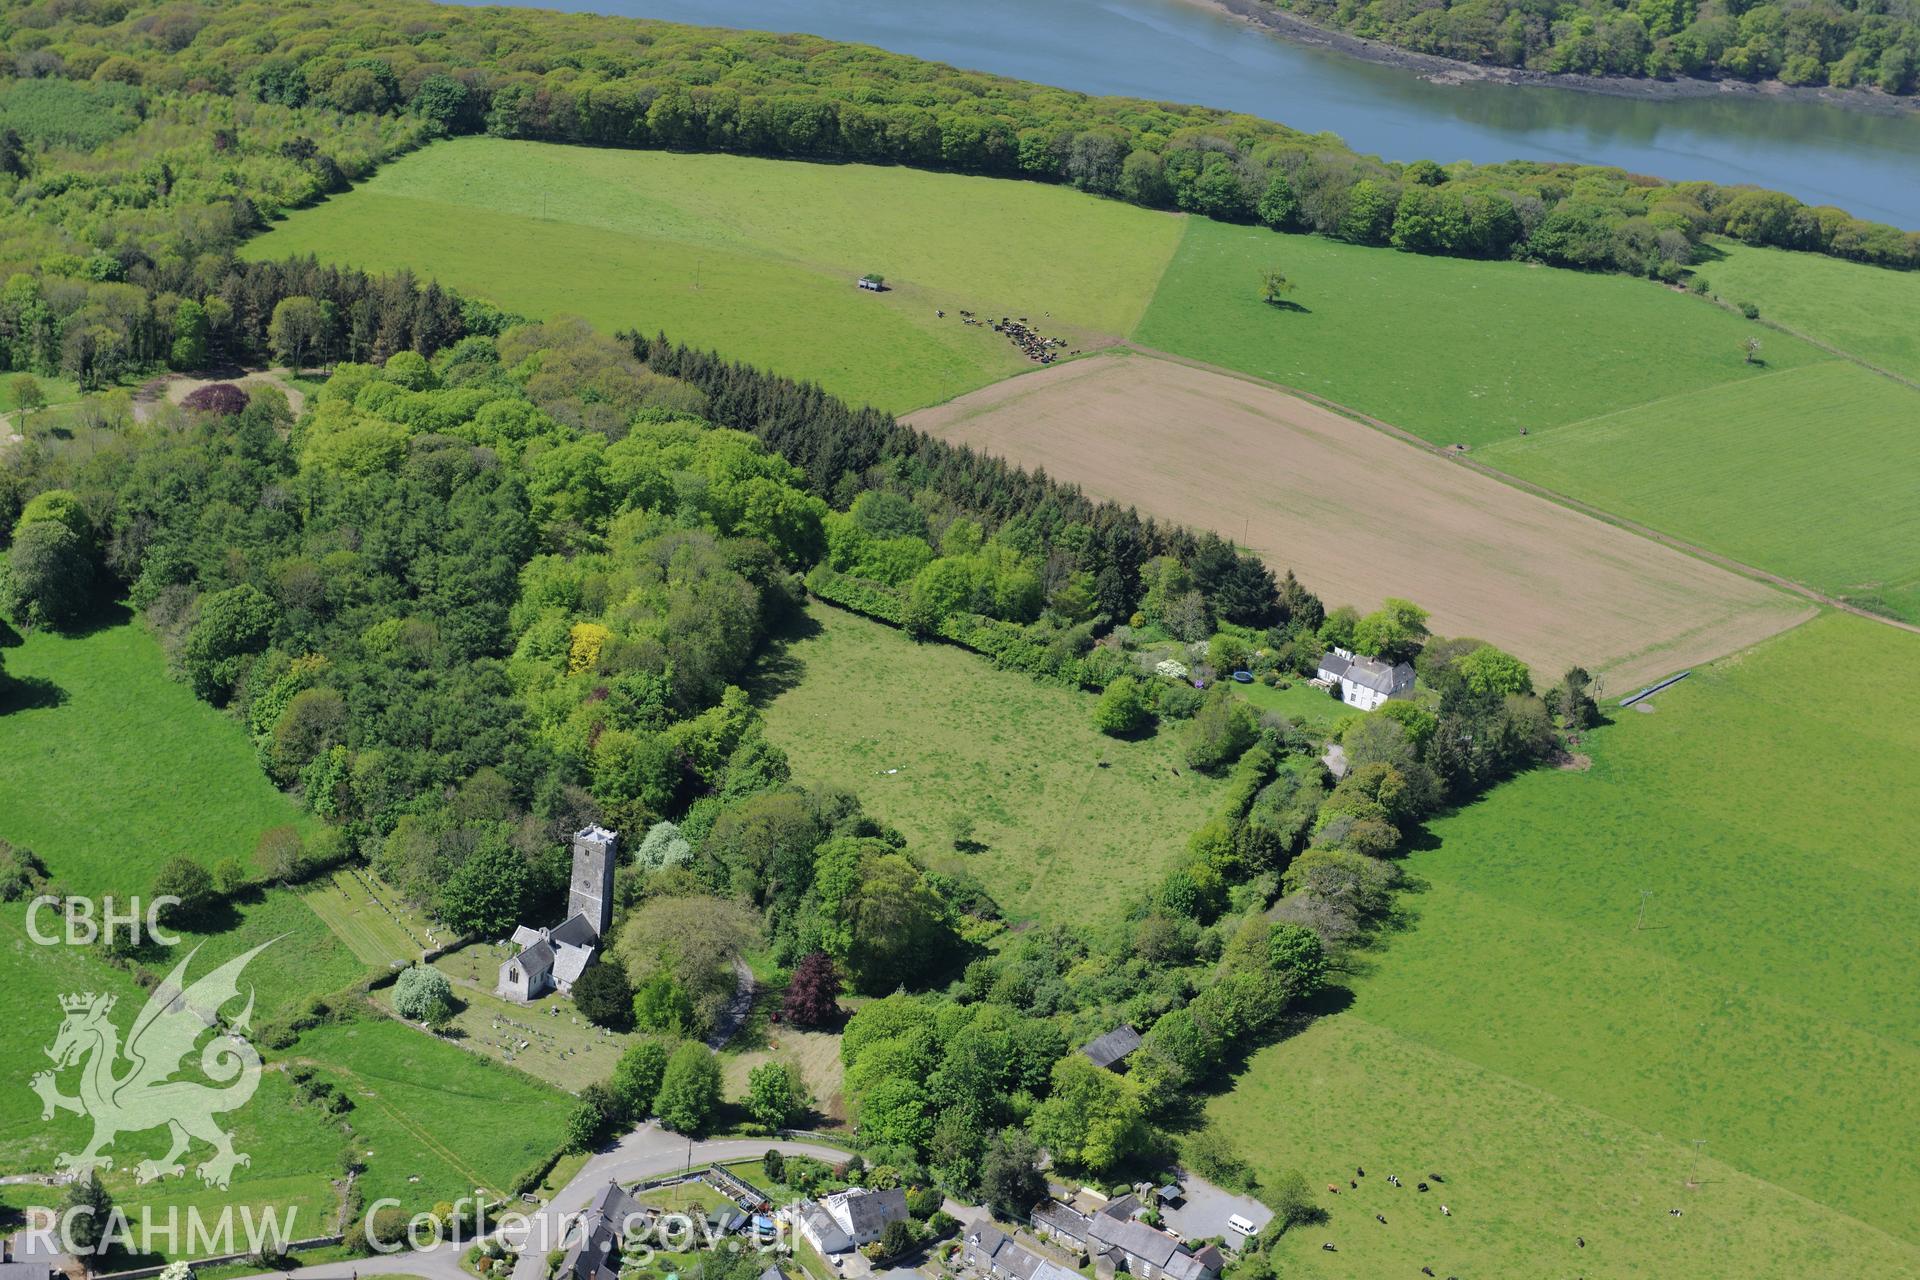 St. Cadog's Church, Lawrenny. Oblique aerial photograph taken during the Royal Commission's programme of archaeological aerial reconnaissance by Toby Driver on 13th May 2015.